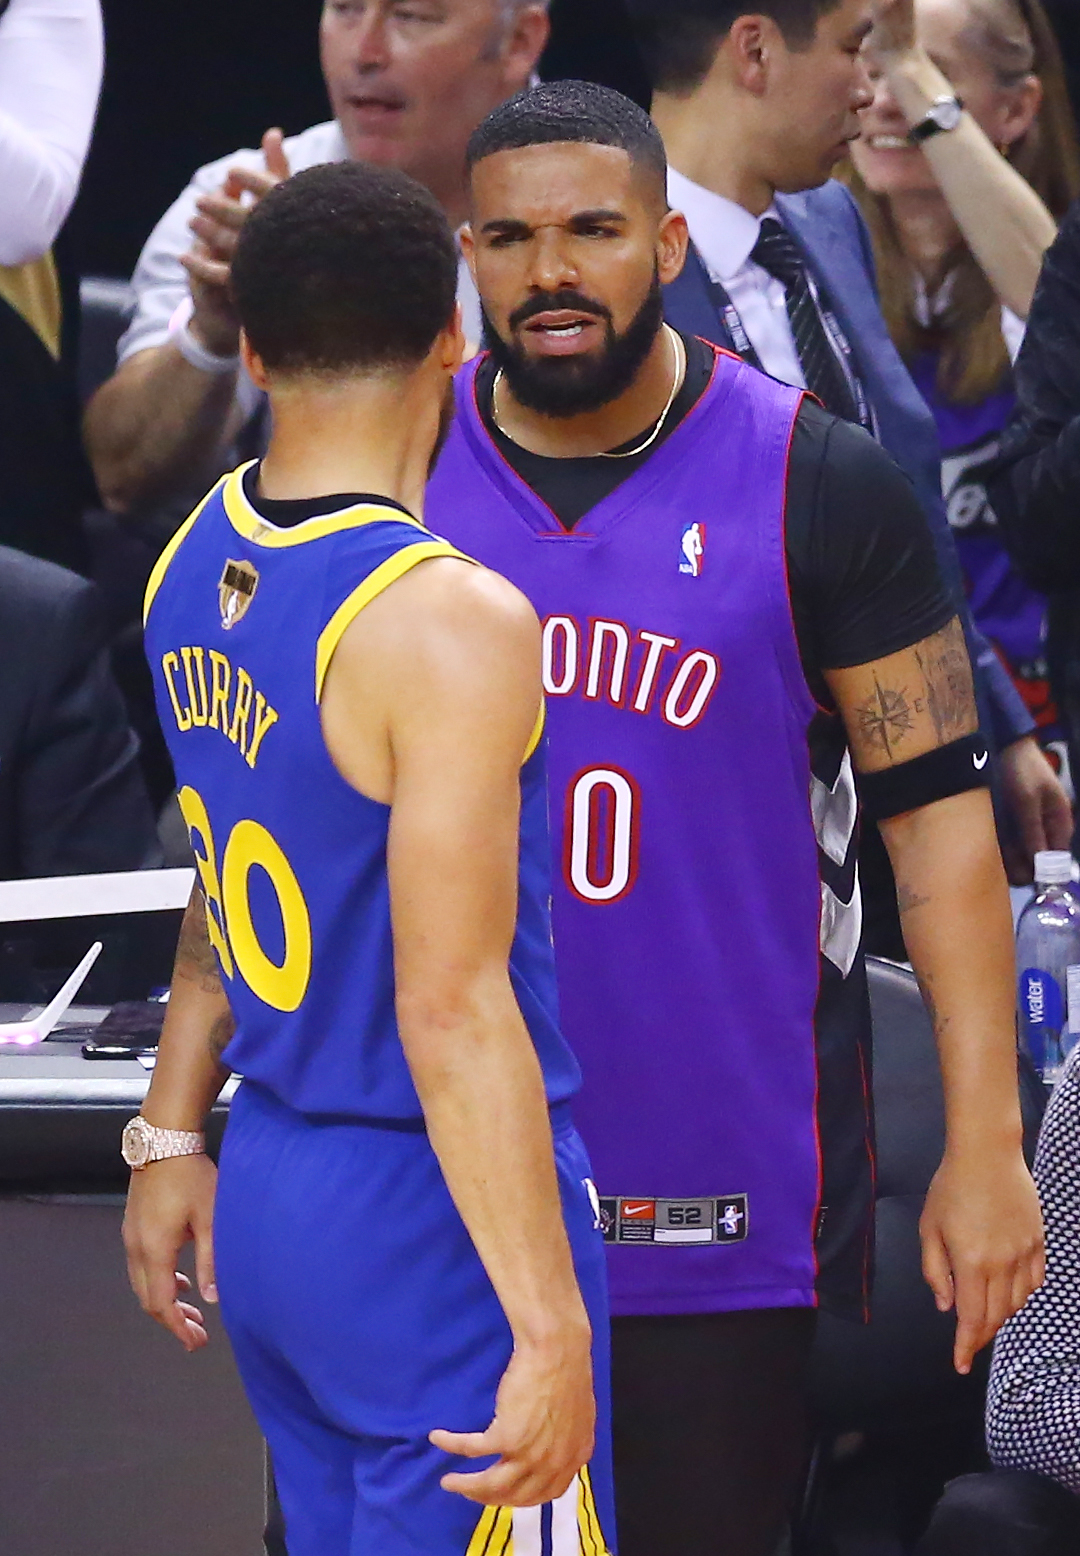 Tracy McGrady reacts to Drake's Dell Curry Raptors jersey from